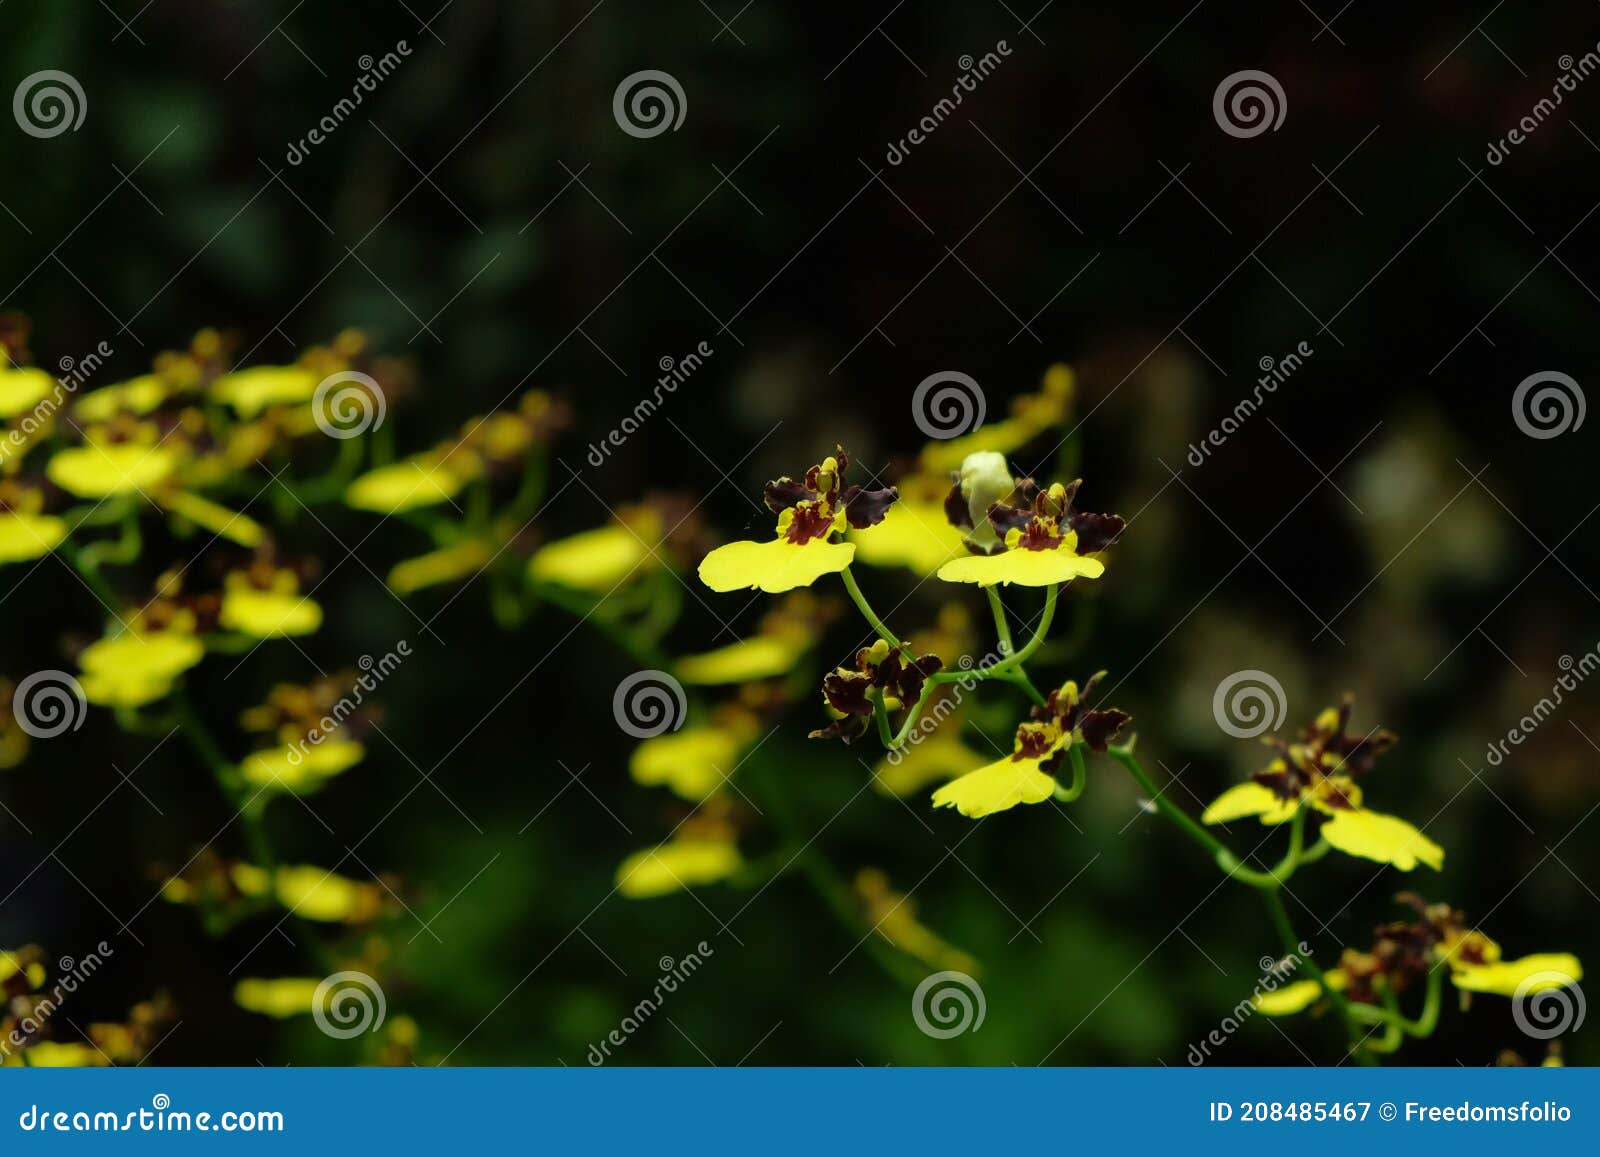 tiny yellow exotic orchid clusters